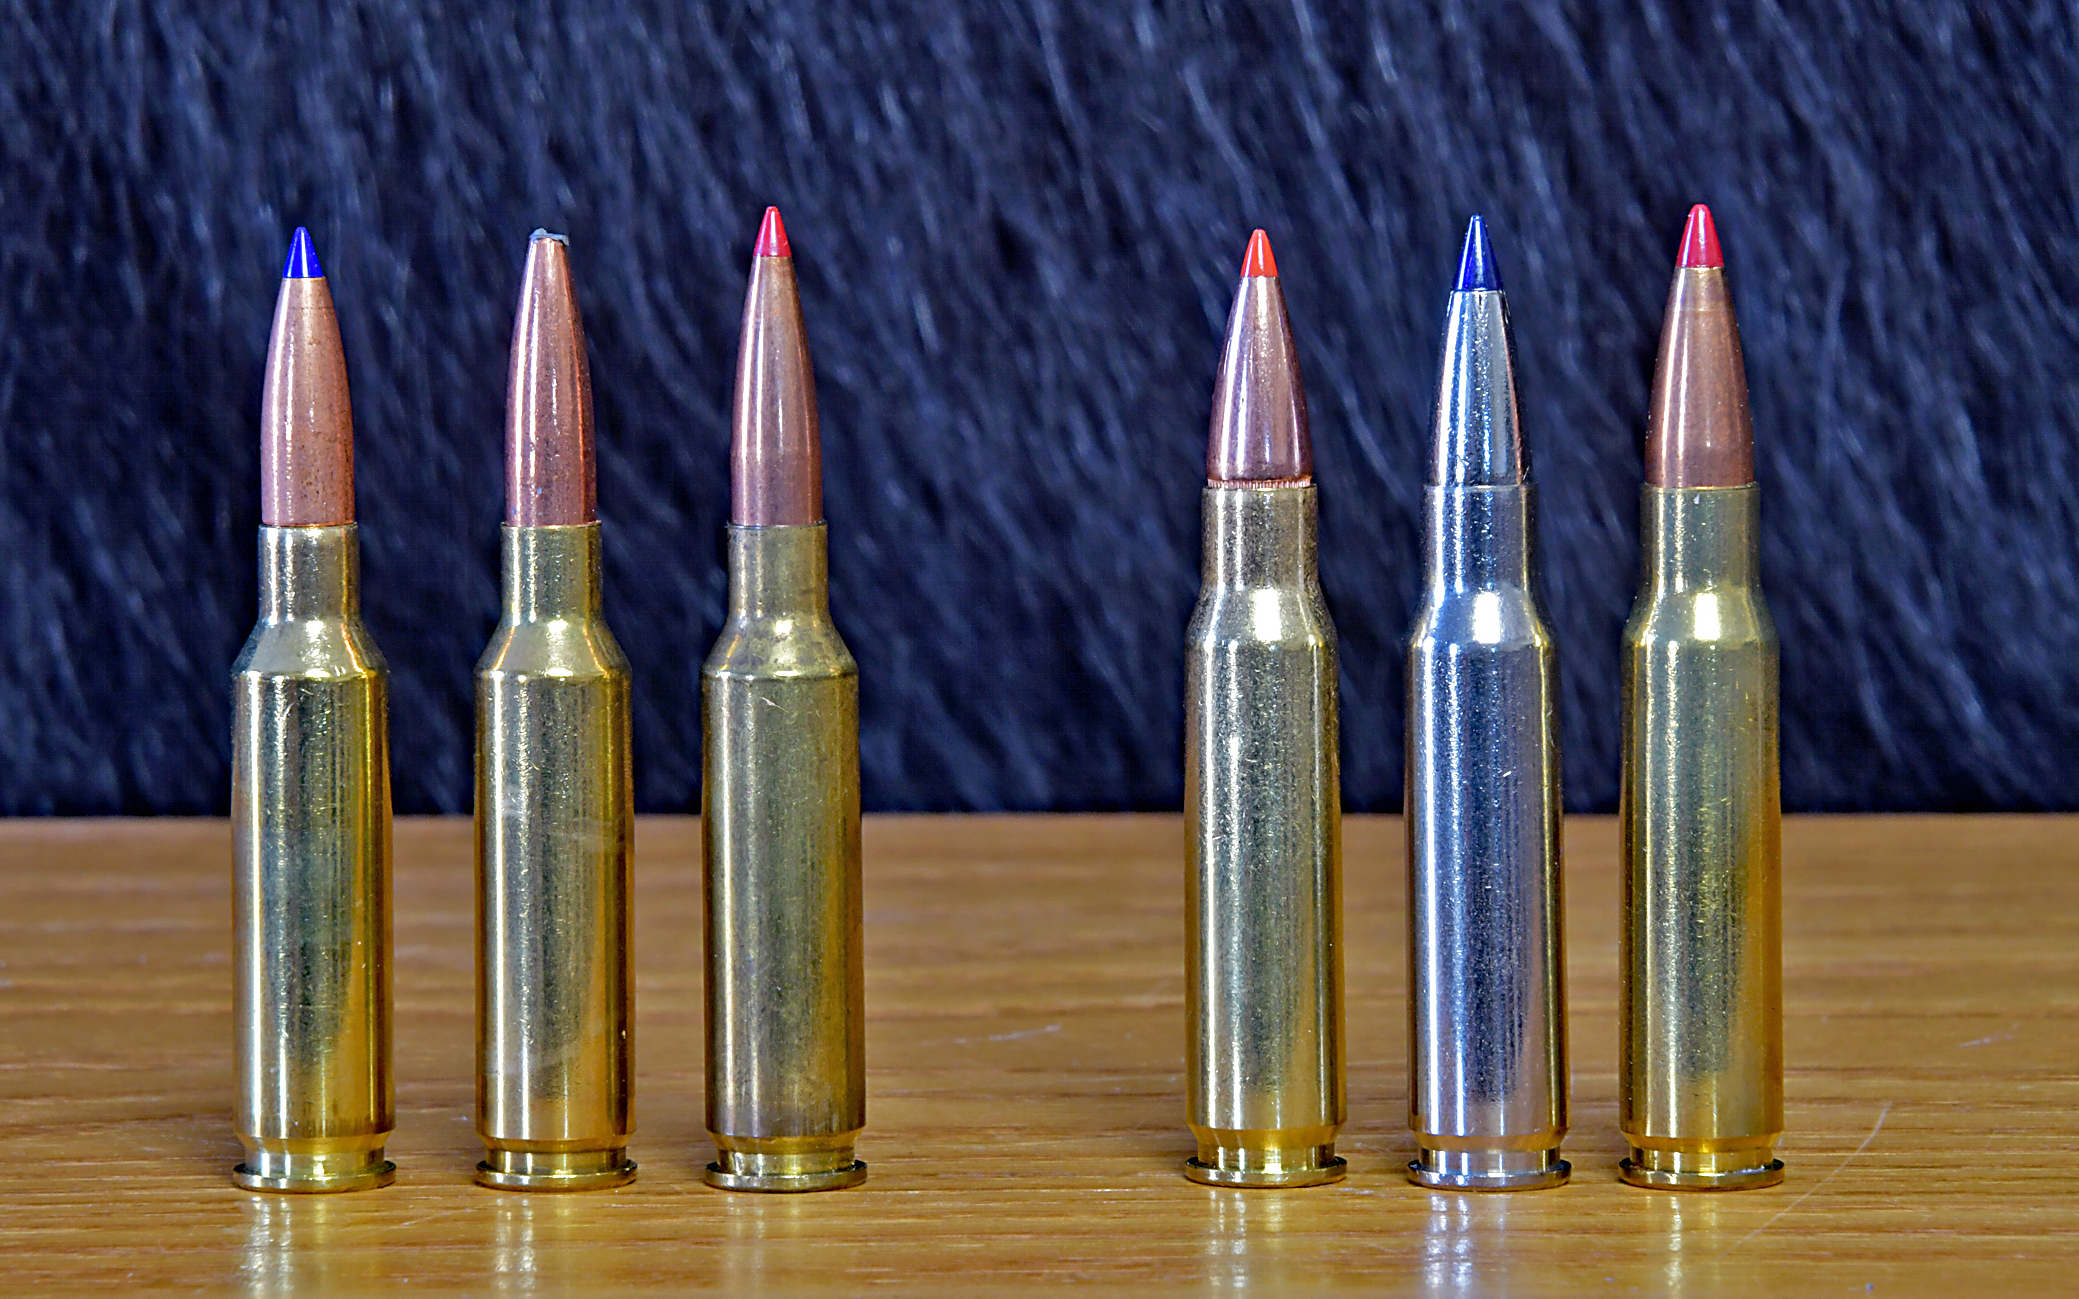 The 6.5 Creedmoor: How it Compares to Other Rifle Cartridges